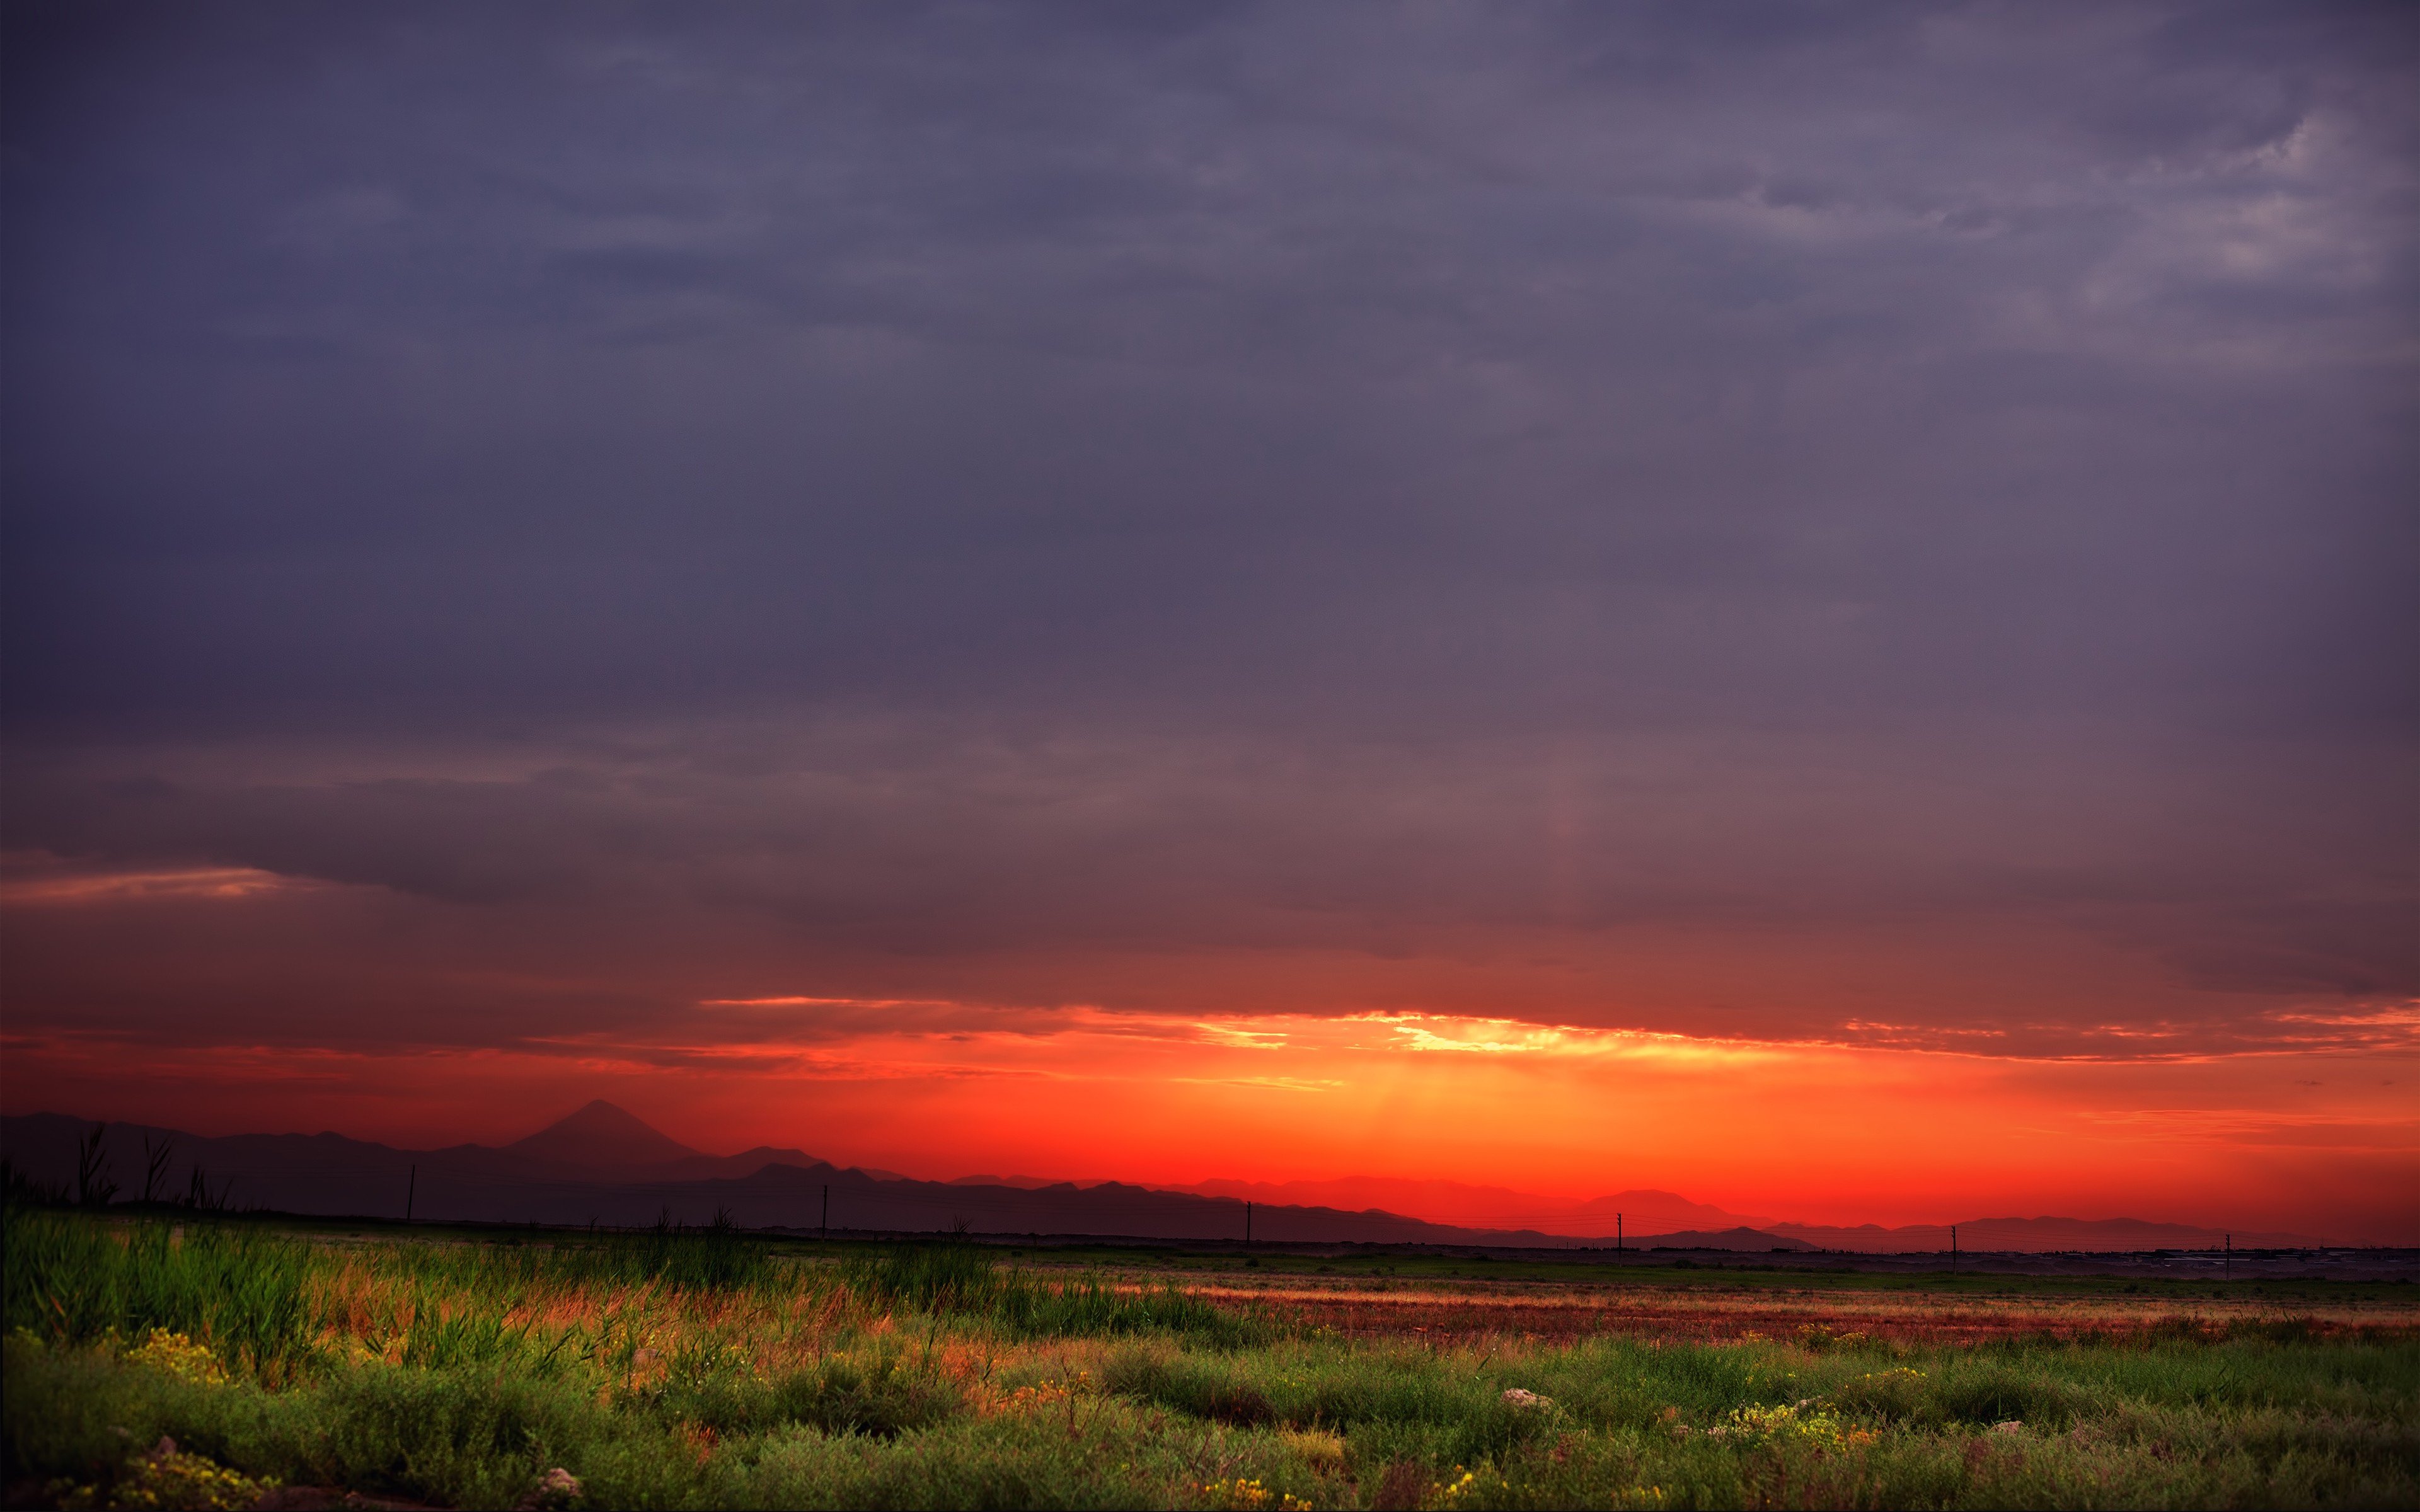 sunset, Clouds, Landscapes, Nature, Horizon, Fields, Iran, Hdr, Photography, Skyscapes Wallpaper